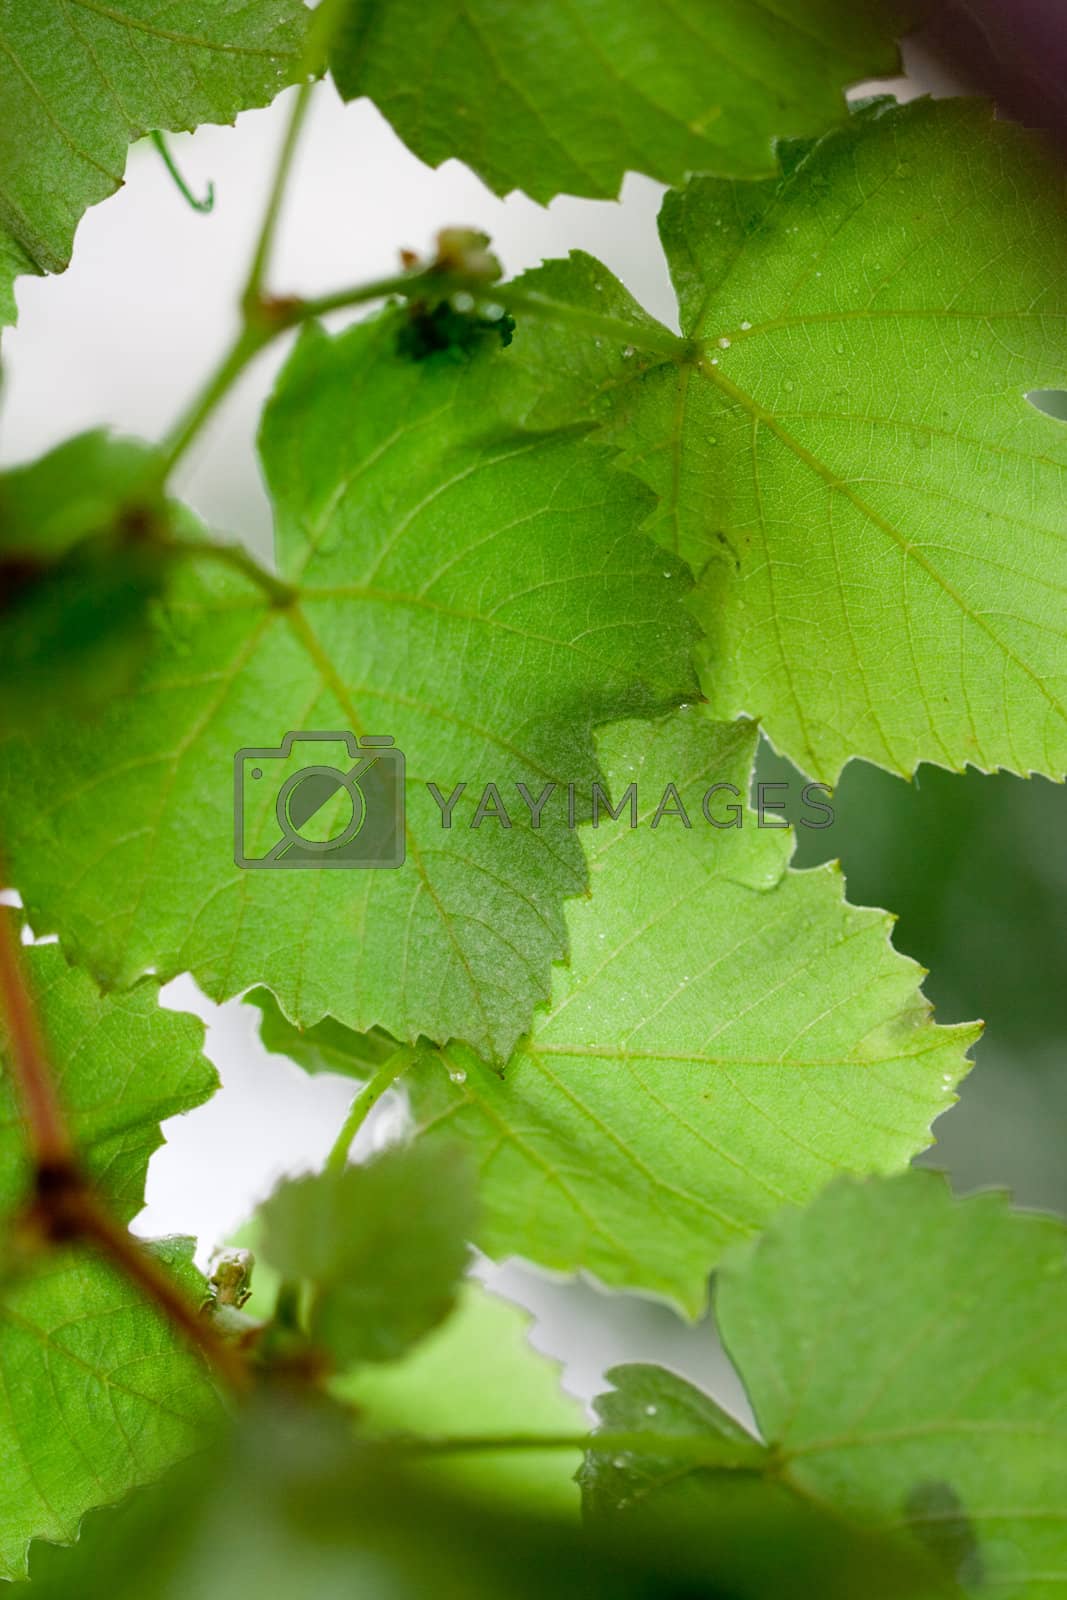 Royalty free image of grren leaves by marylooo